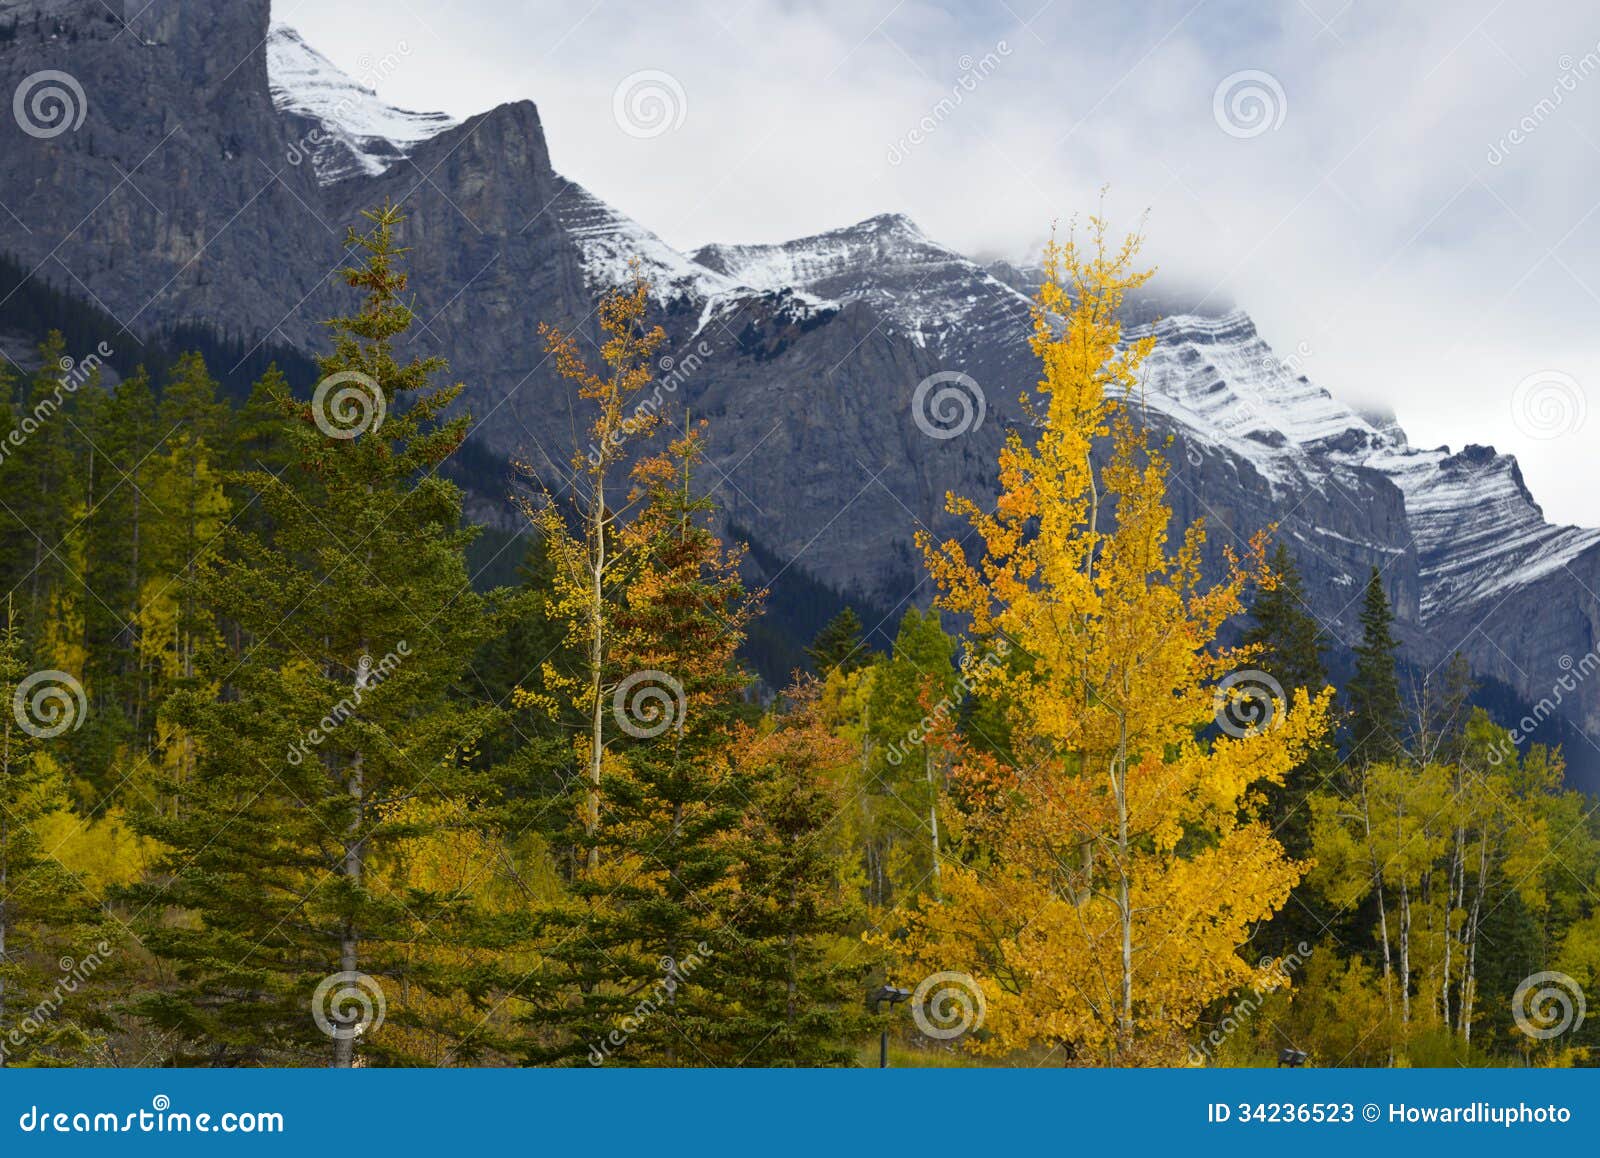 fall color in canadian rockies